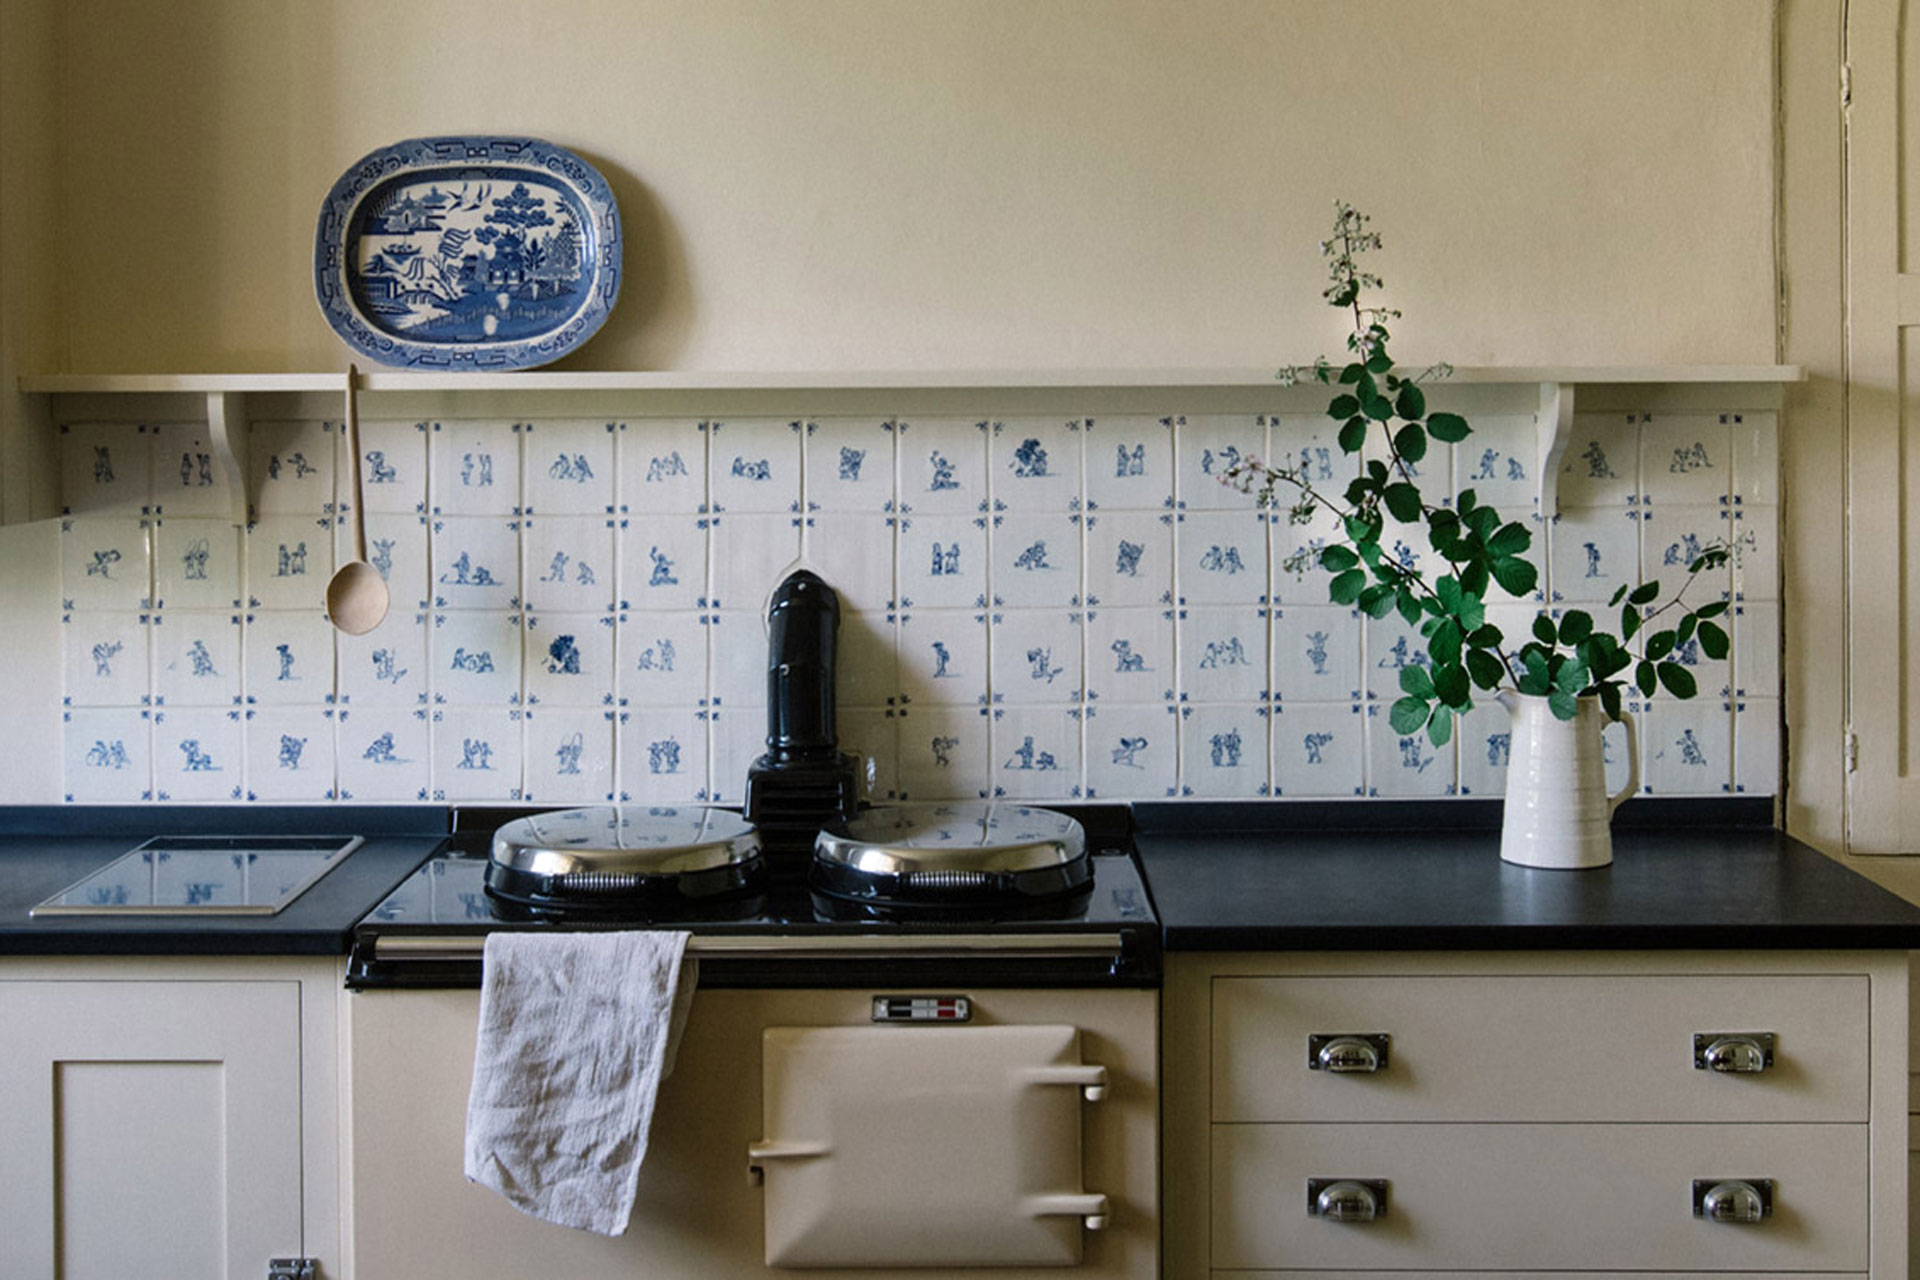 Delftware tiles in a traditional British Kitchen by Plain English